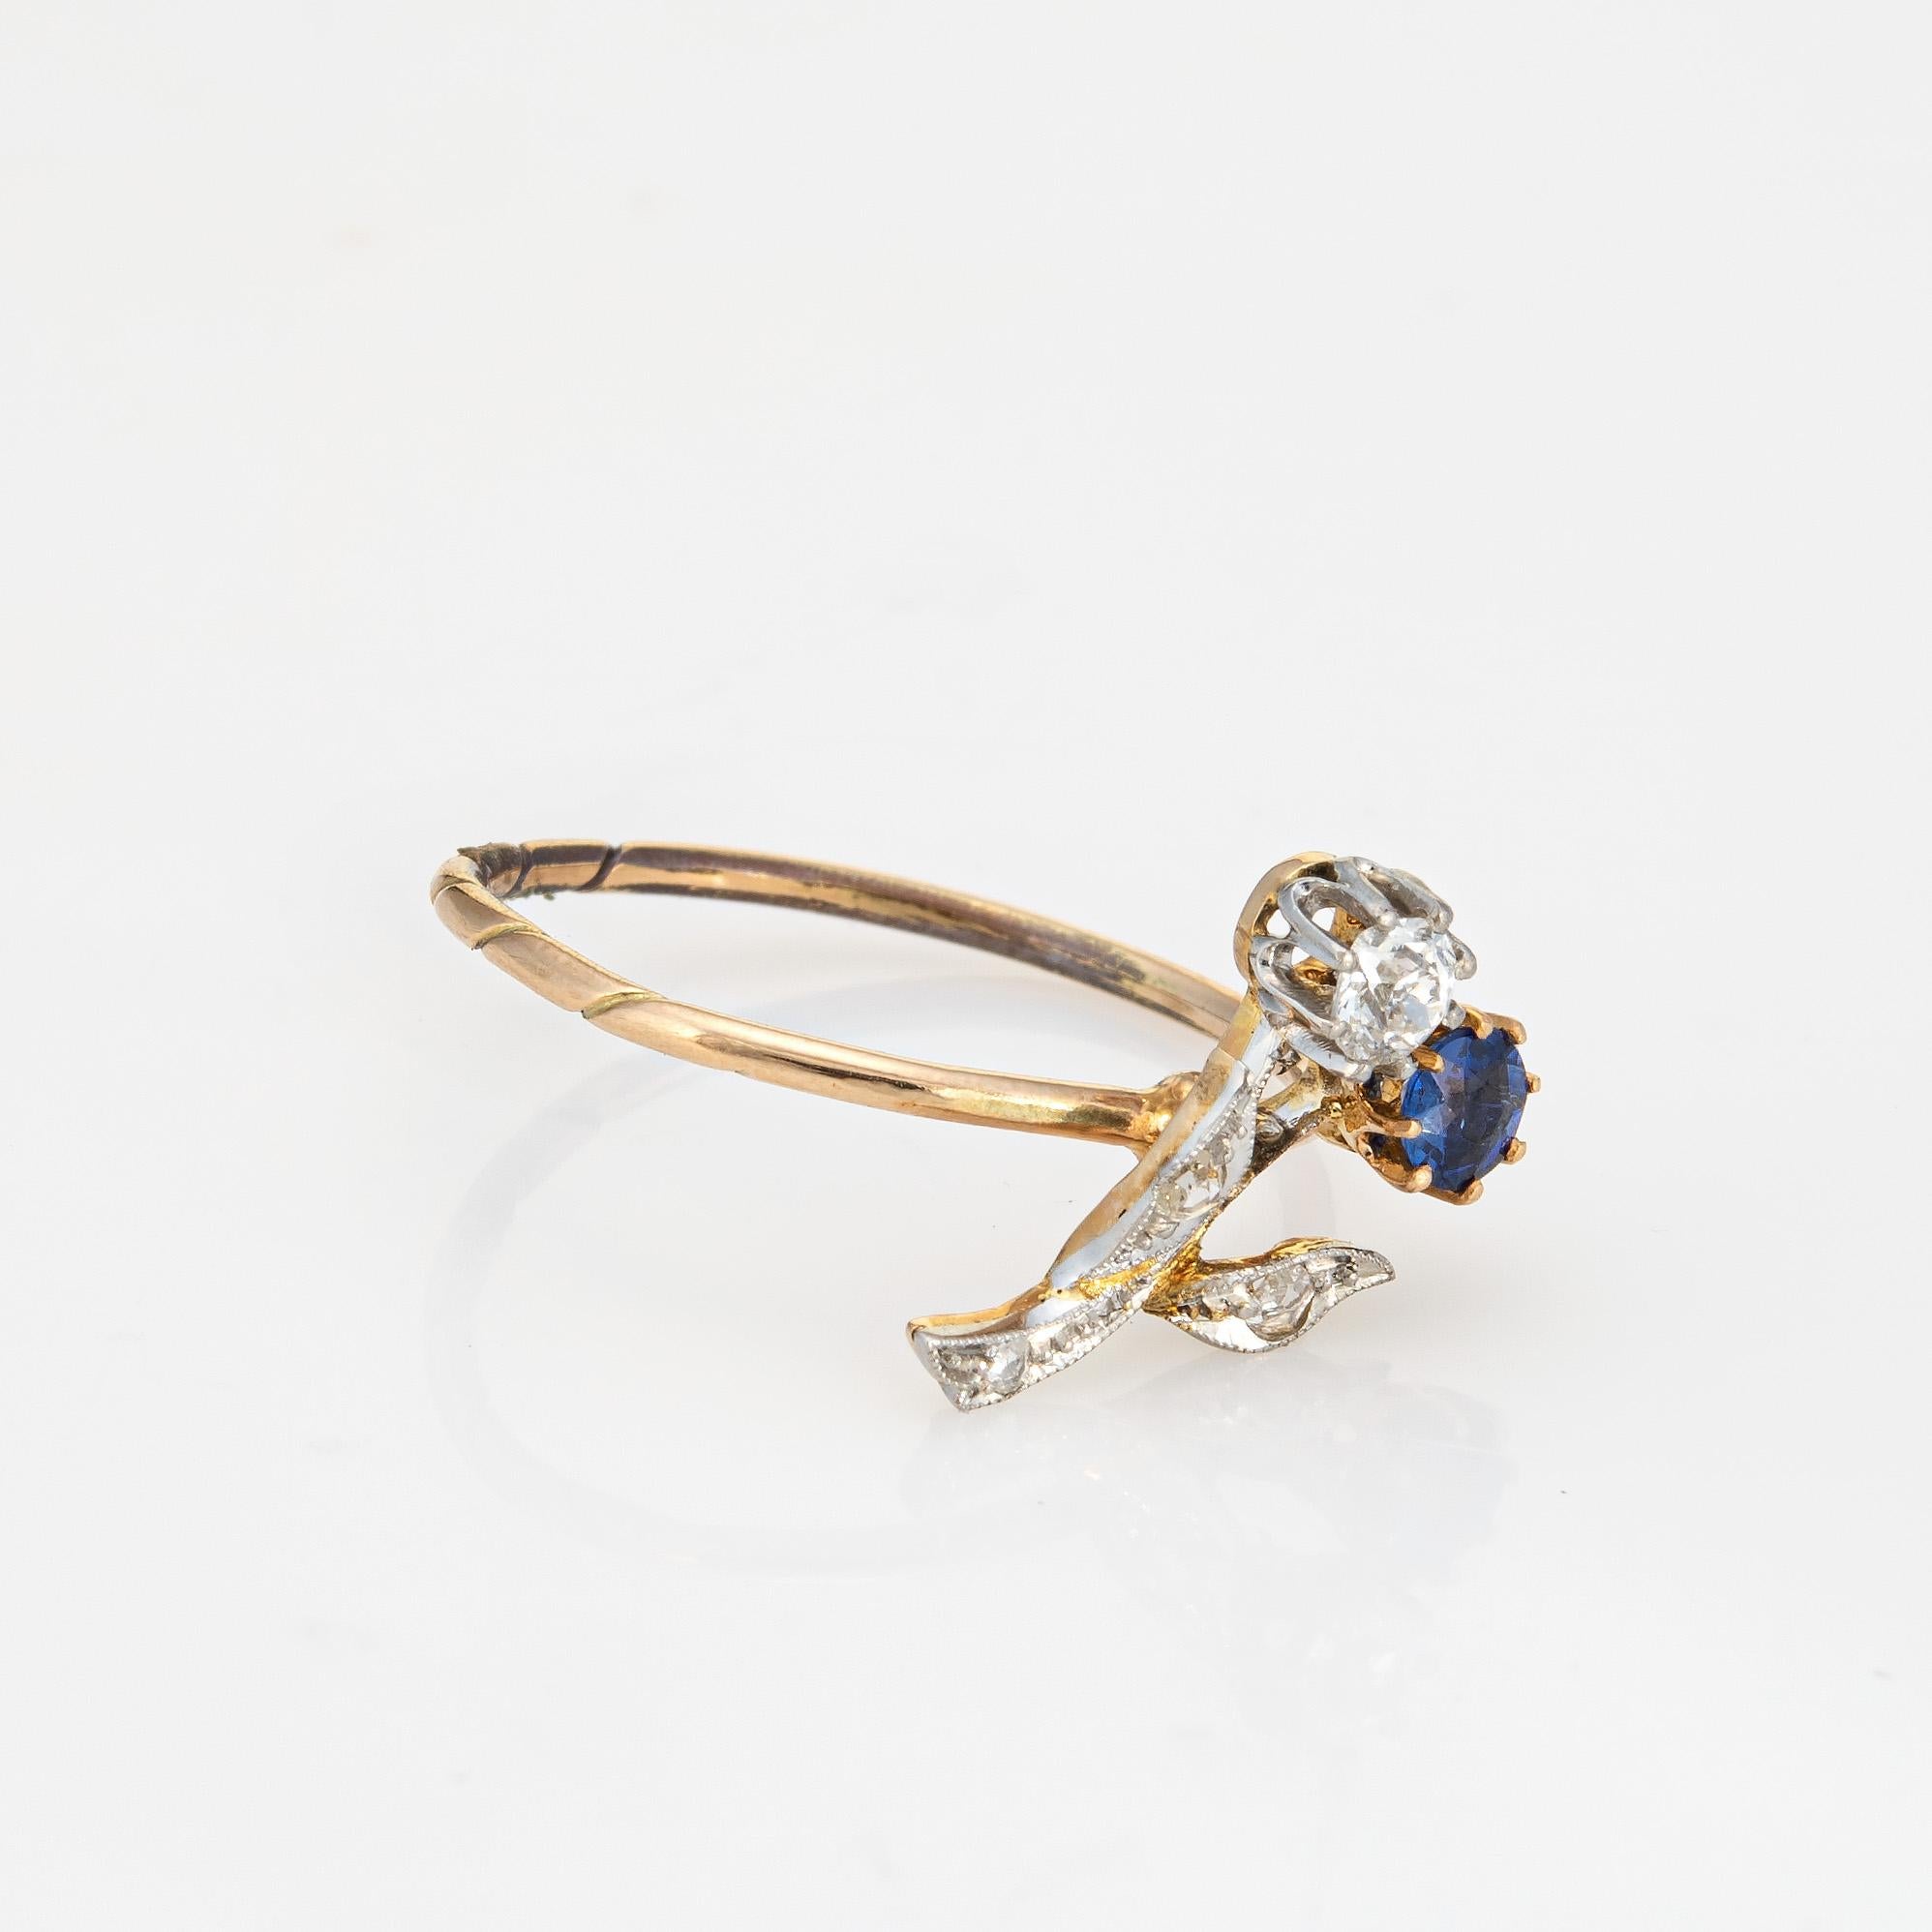 Old Mine Cut Antique Victorian Ring Flowers Diamond Sapphire Conversion Band 14k Yellow Gold